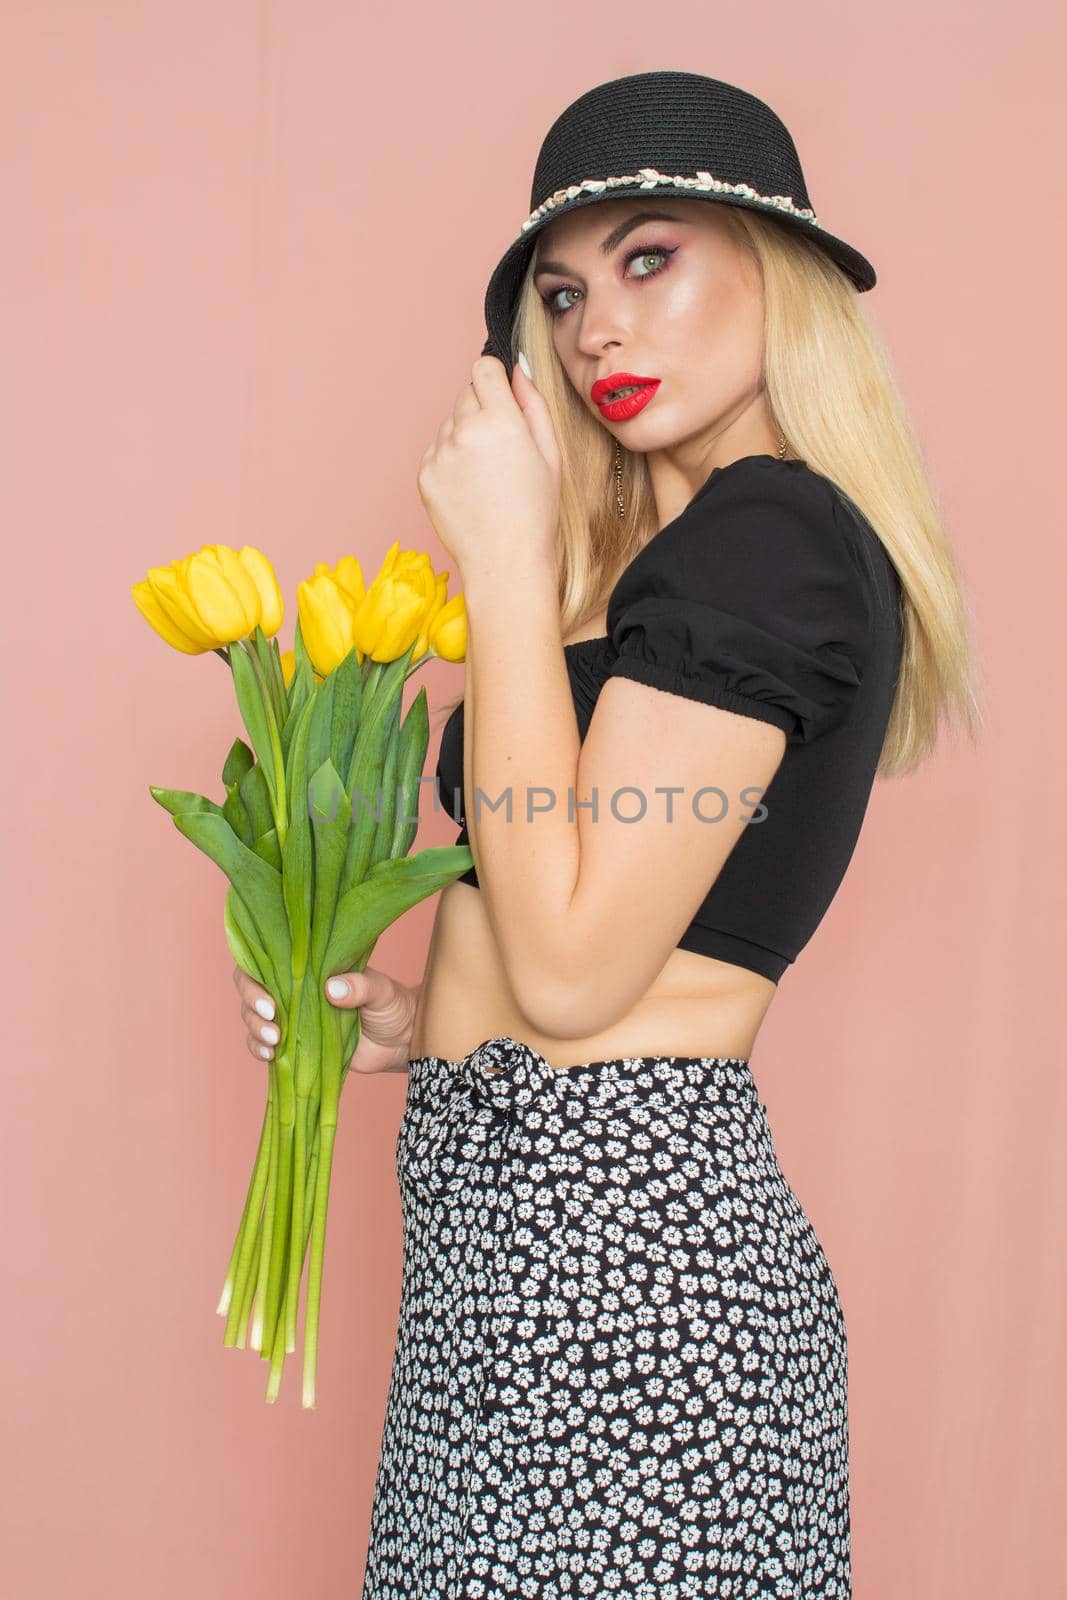 Summer fashion portrait blonde woman. Sexy look in black top and skirt, wearing hat. Red lips. Holding yellow tulips in her hands